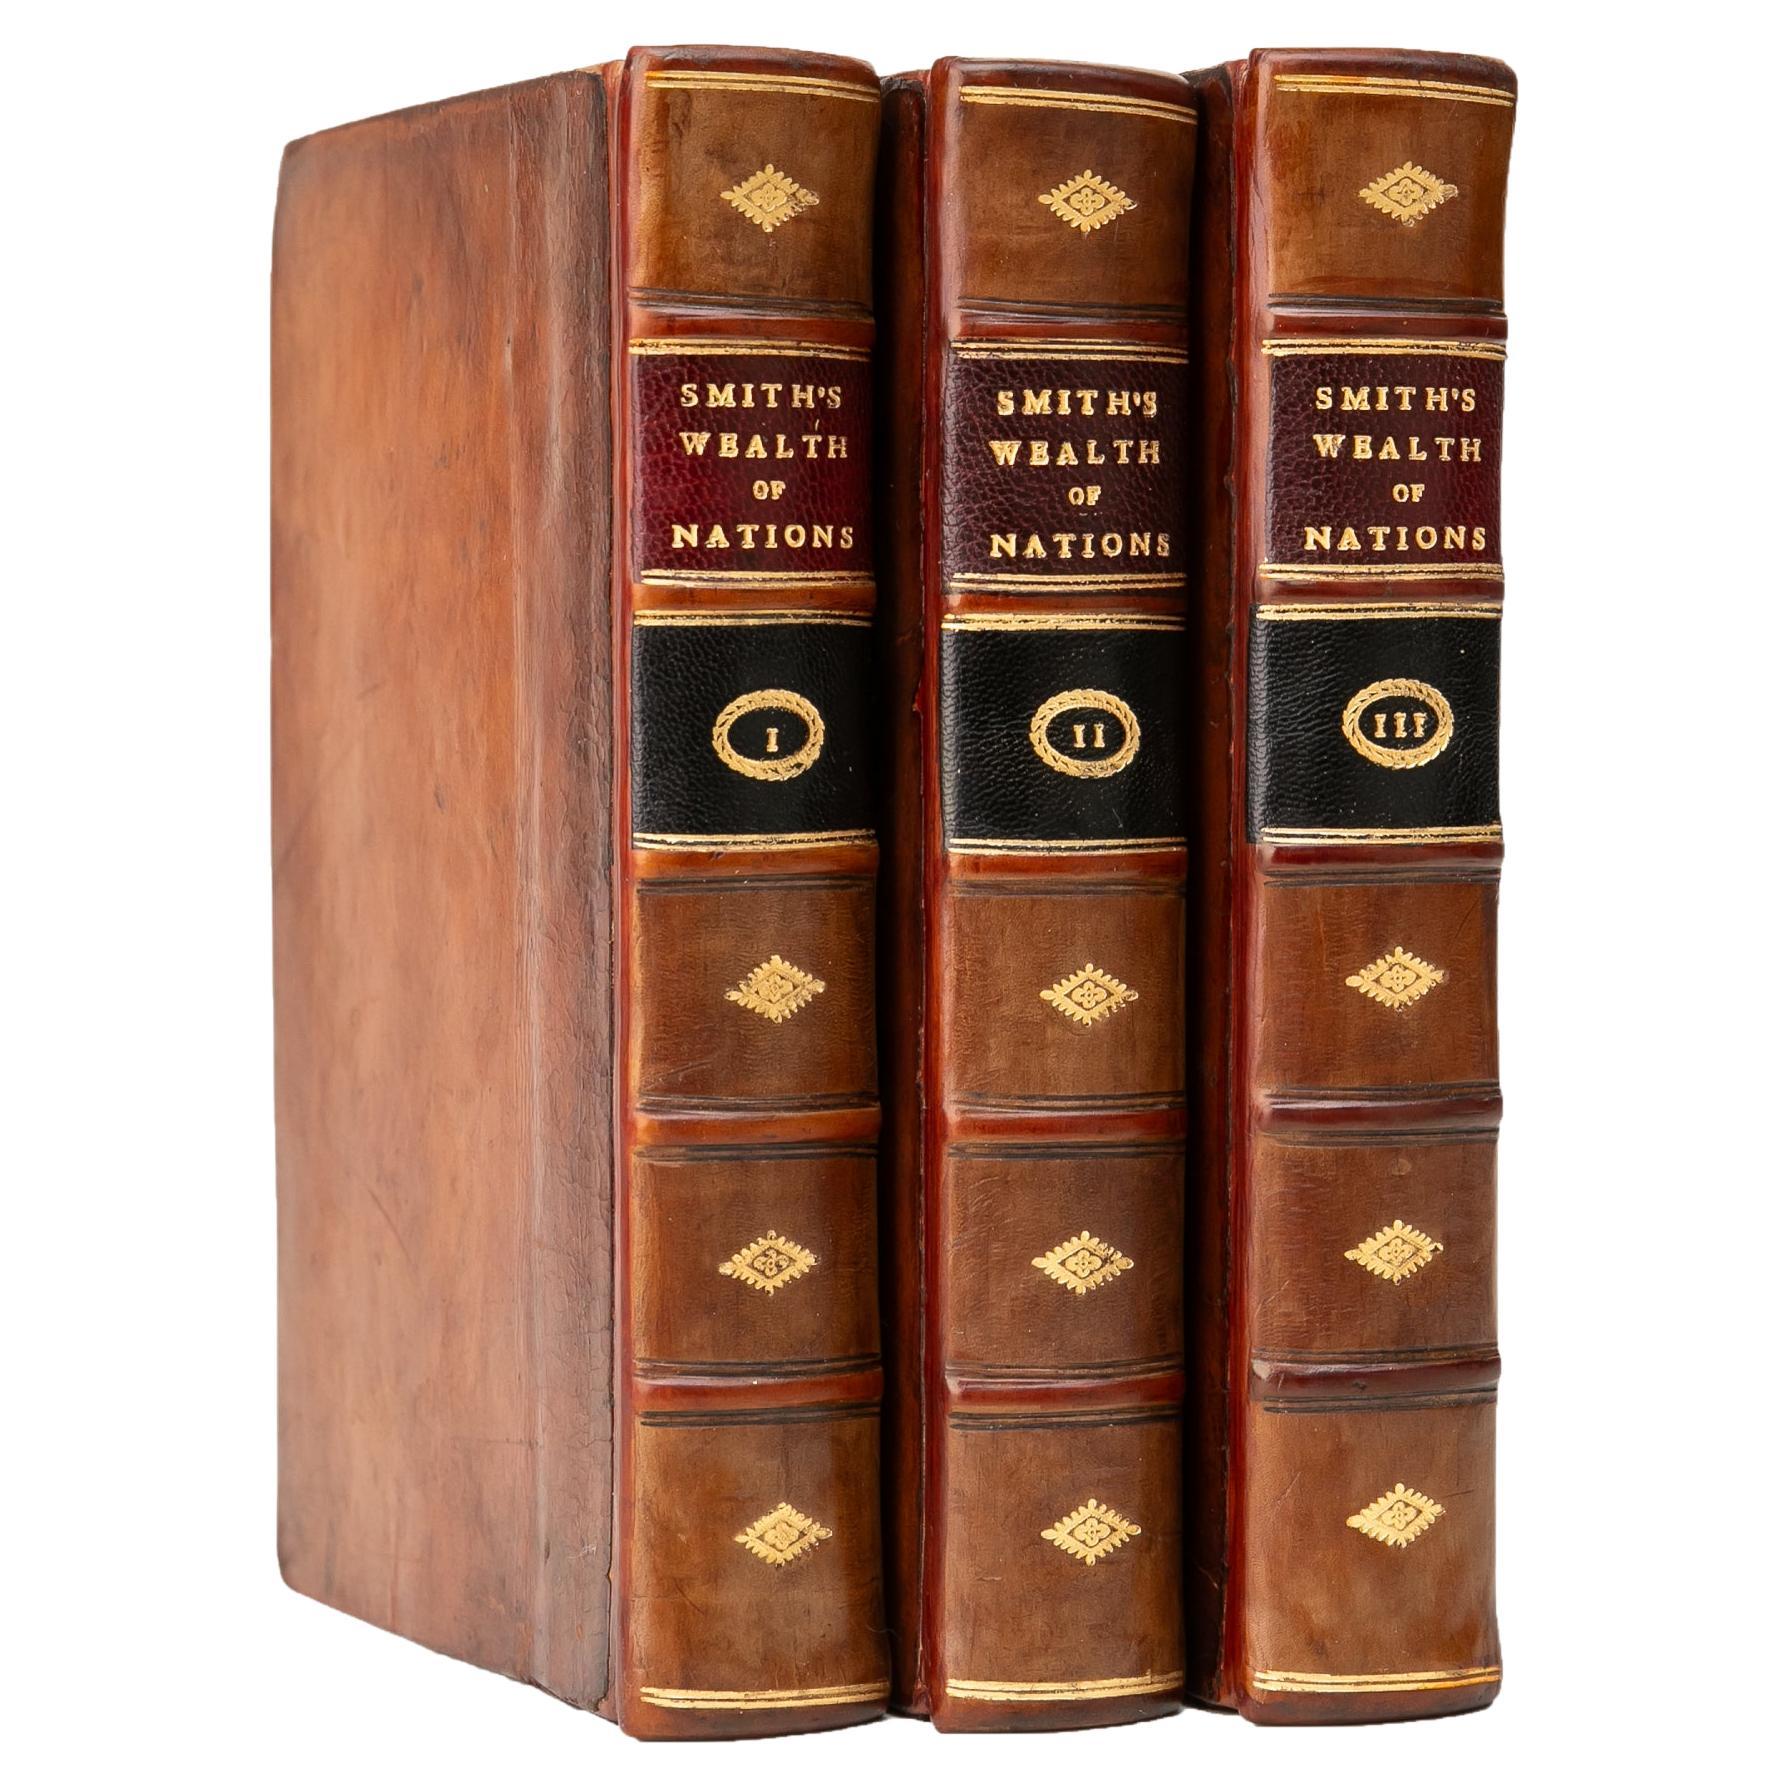 3 Volumes. Adam Smith, The Wealth of Nations.